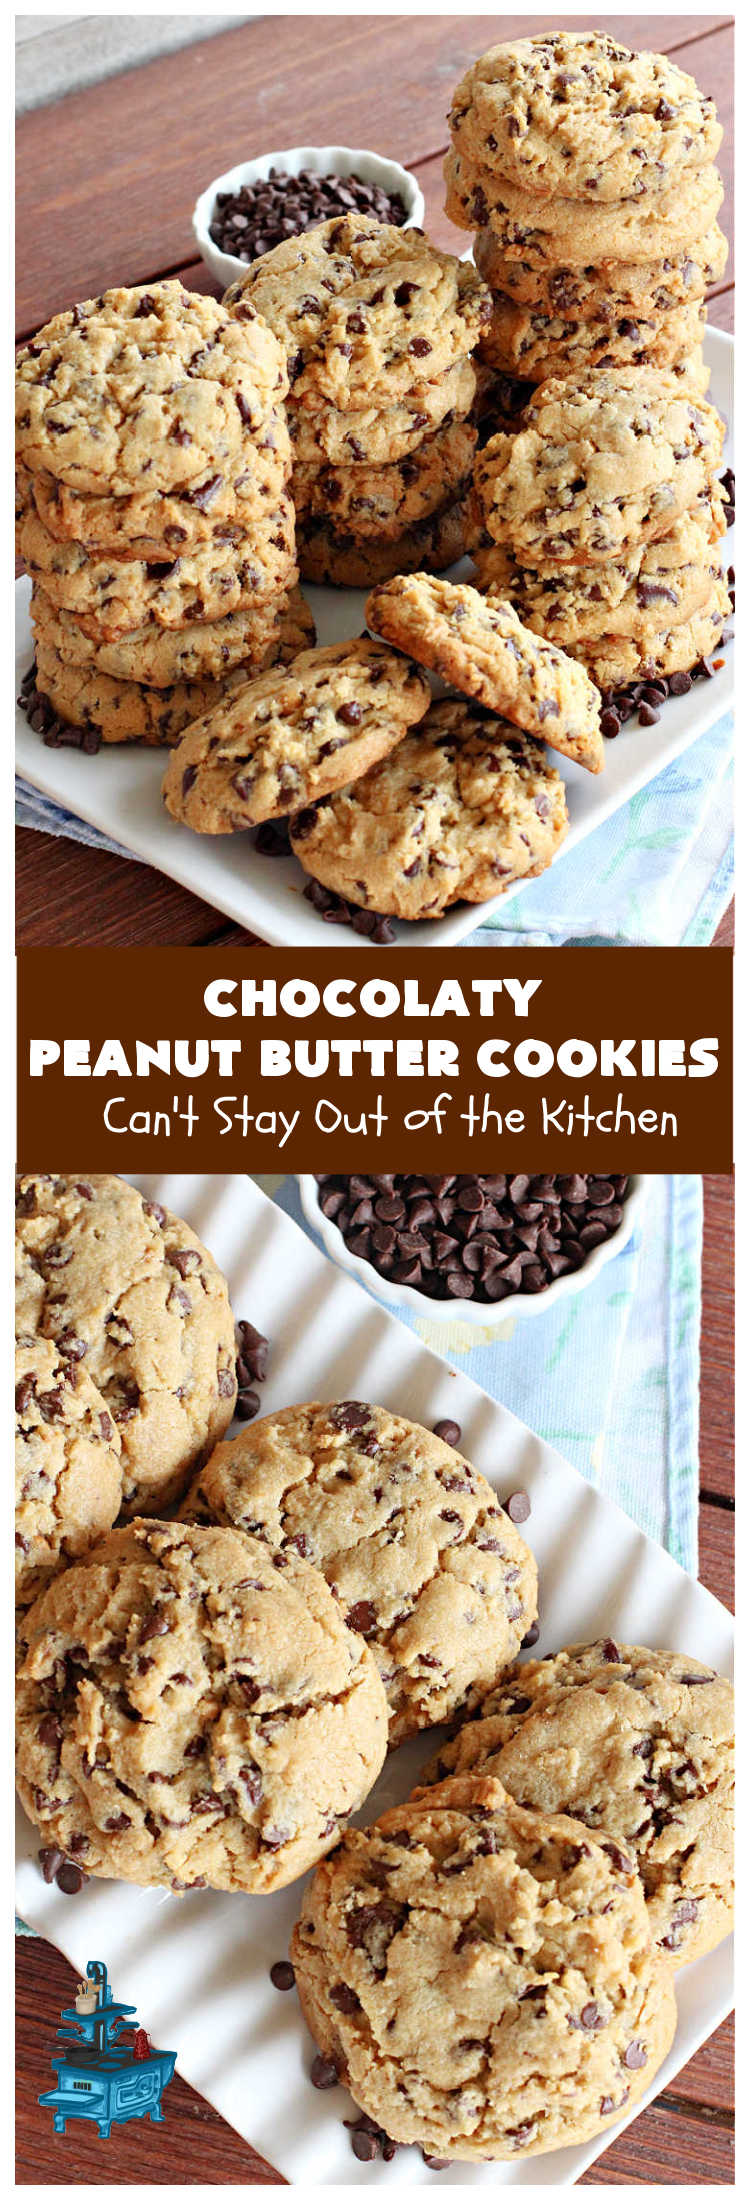 Chocolaty Peanut Butter Cookies | Can't Stay Out of the Kitchen